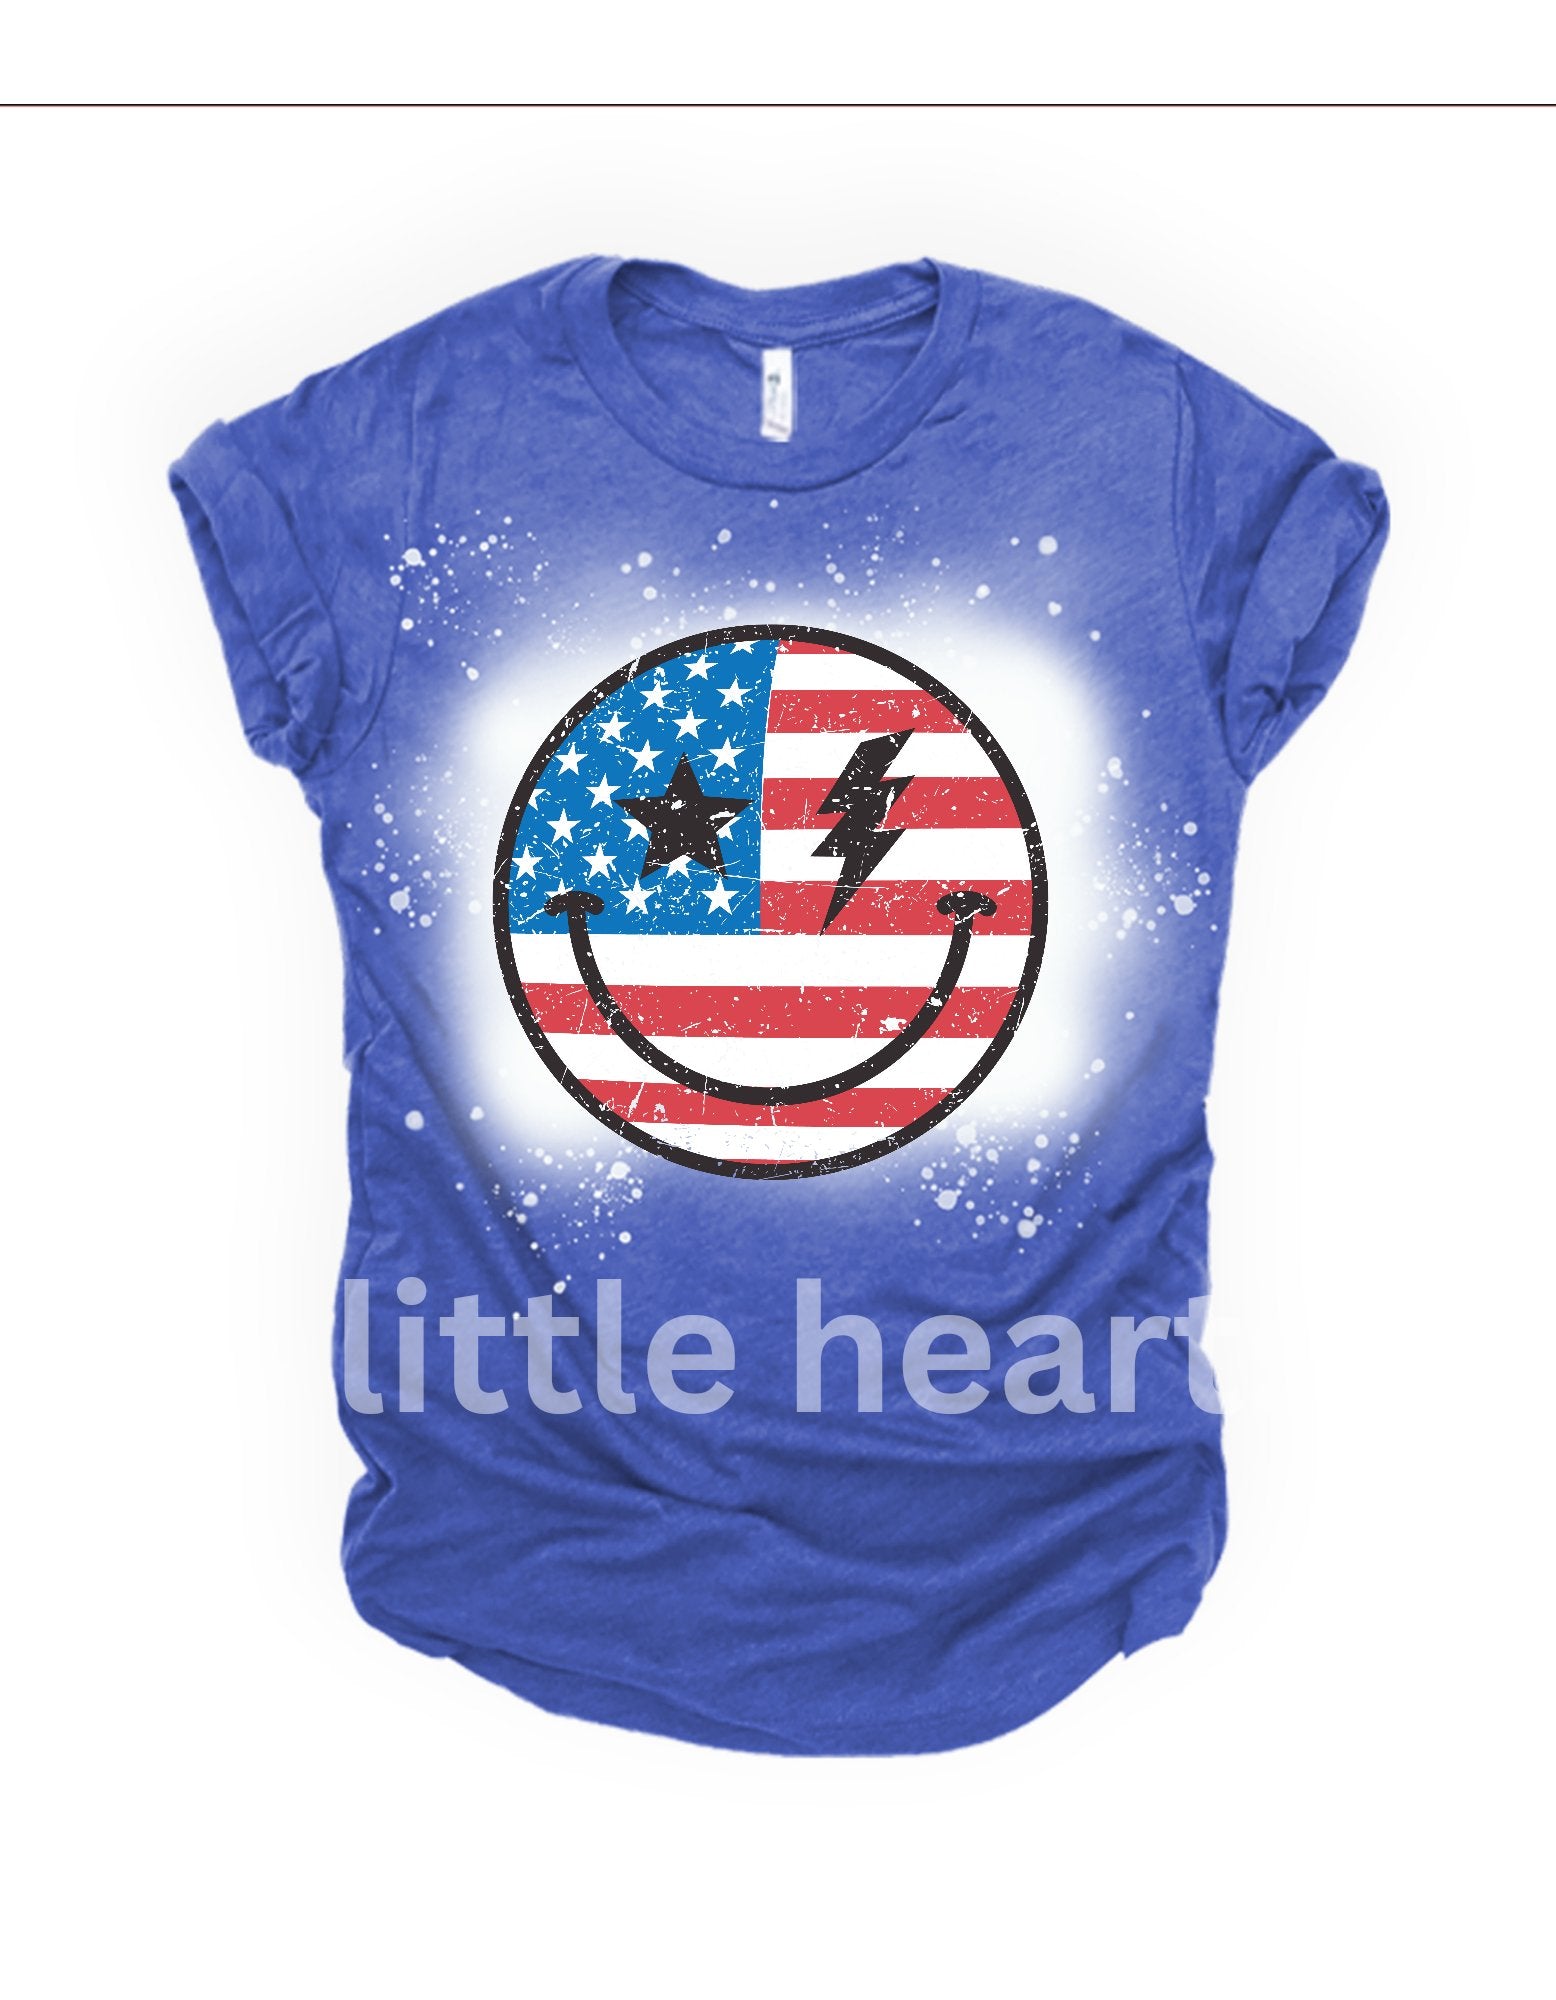 American flag smiley face bleached graphic tee - 4 little hearts